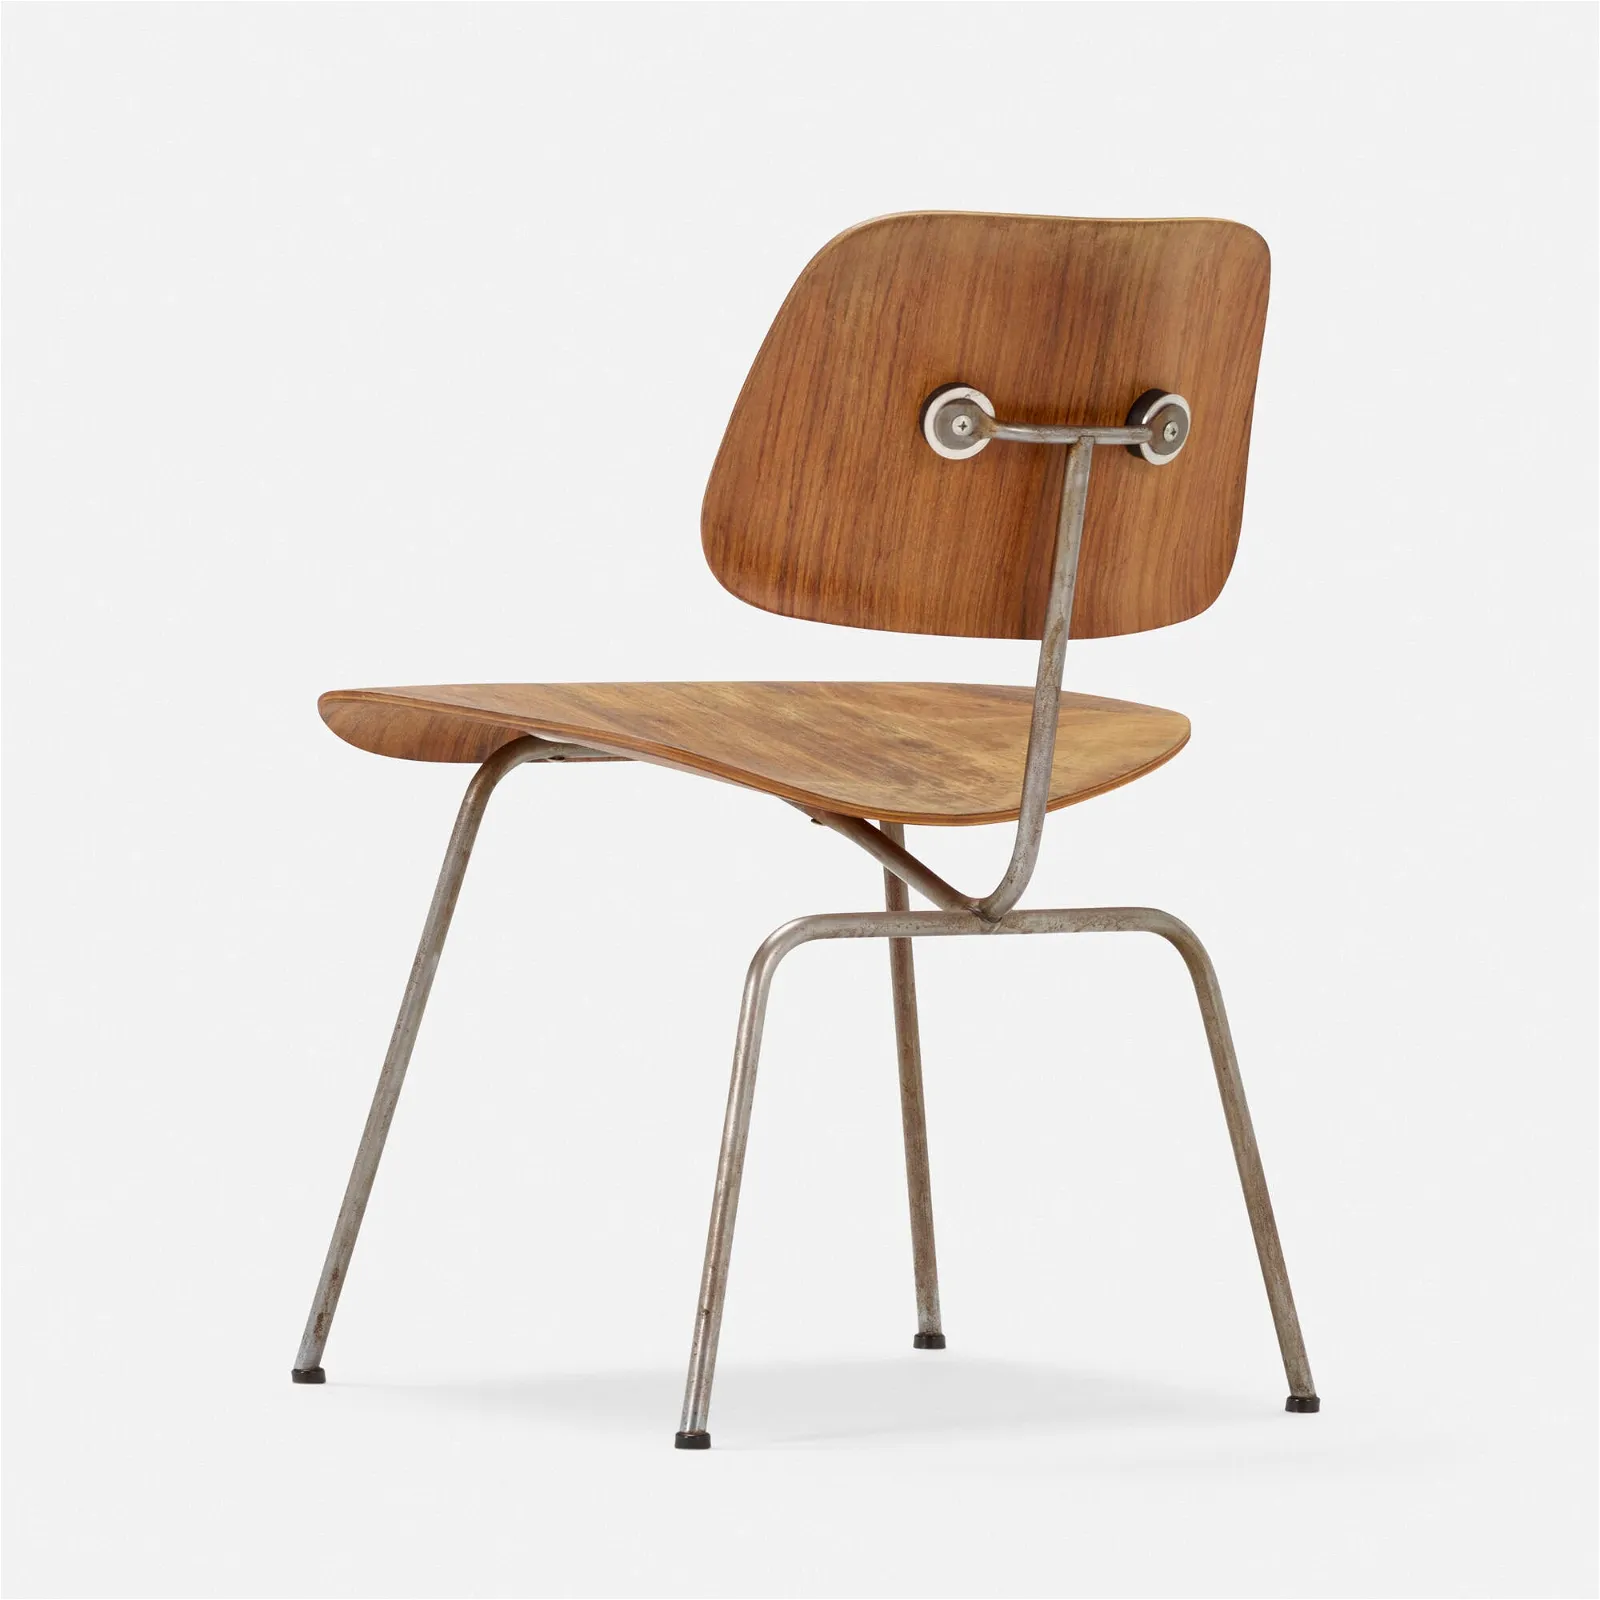 An early Charles and Ray Eames DCM chair by Evans Plywood Division. $28,000 at Los Angeles Modern Auction.